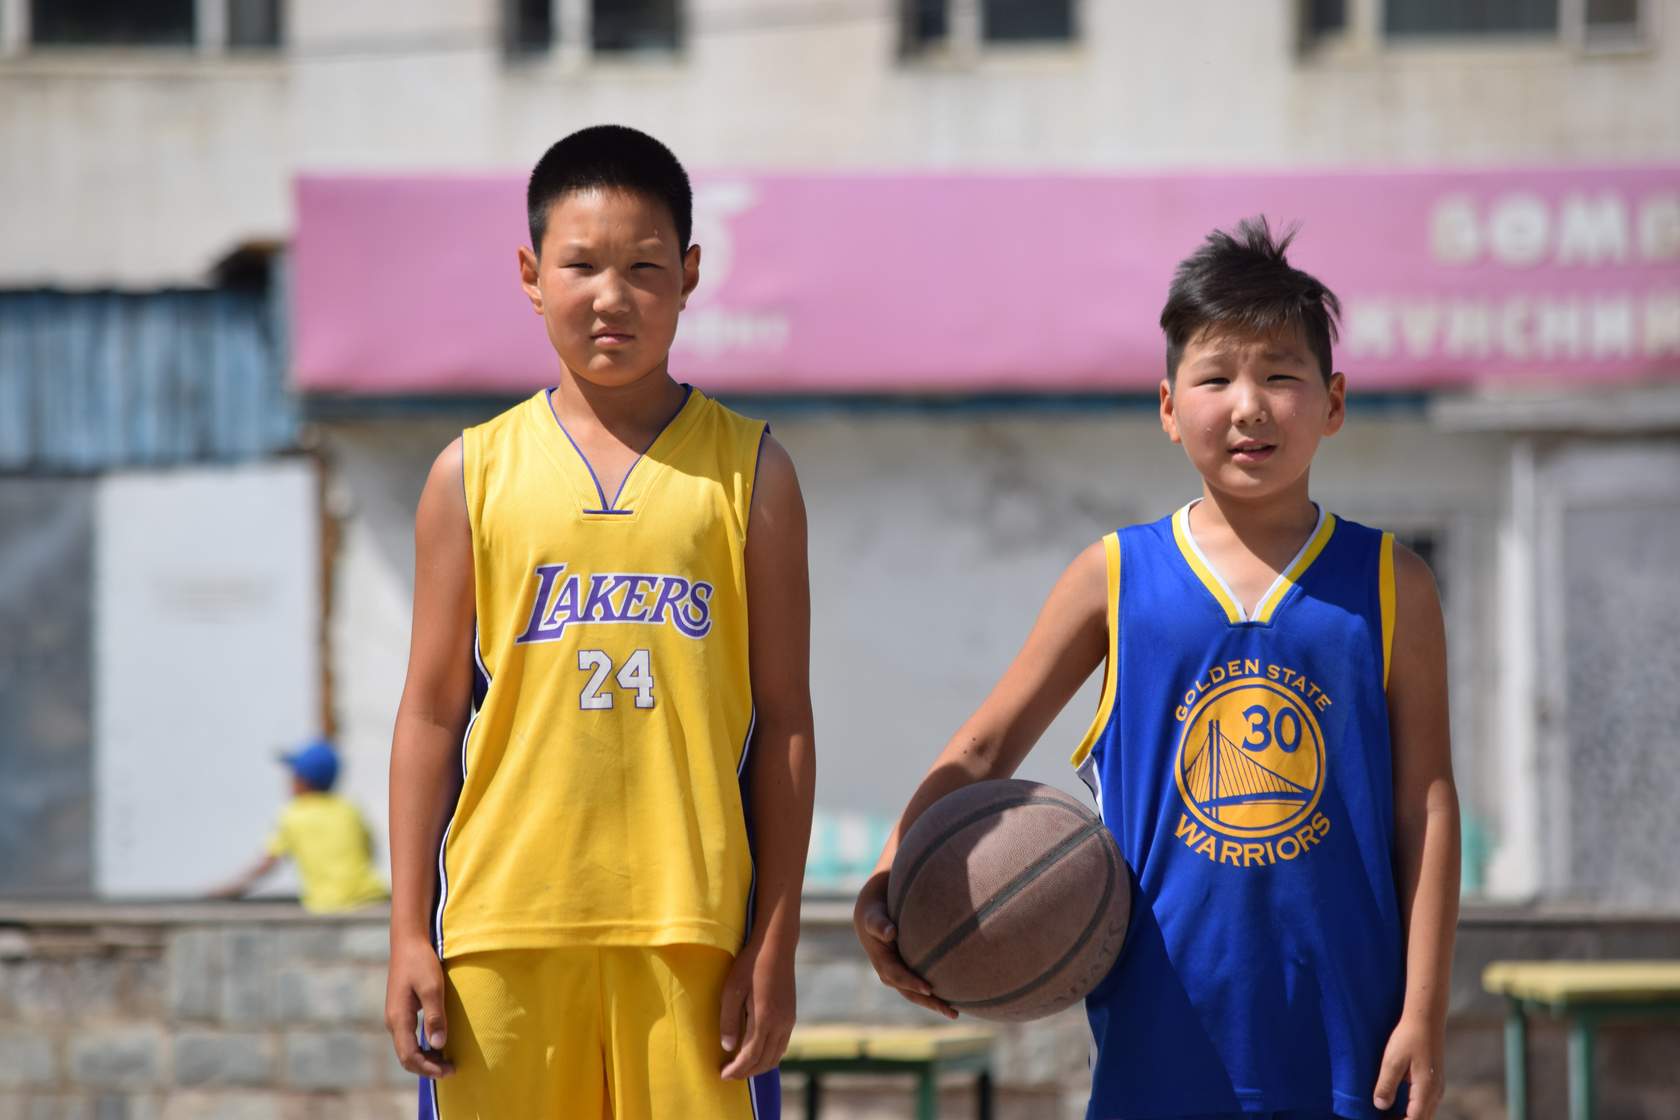 Two boys standing next to each other in basketball uniforms.